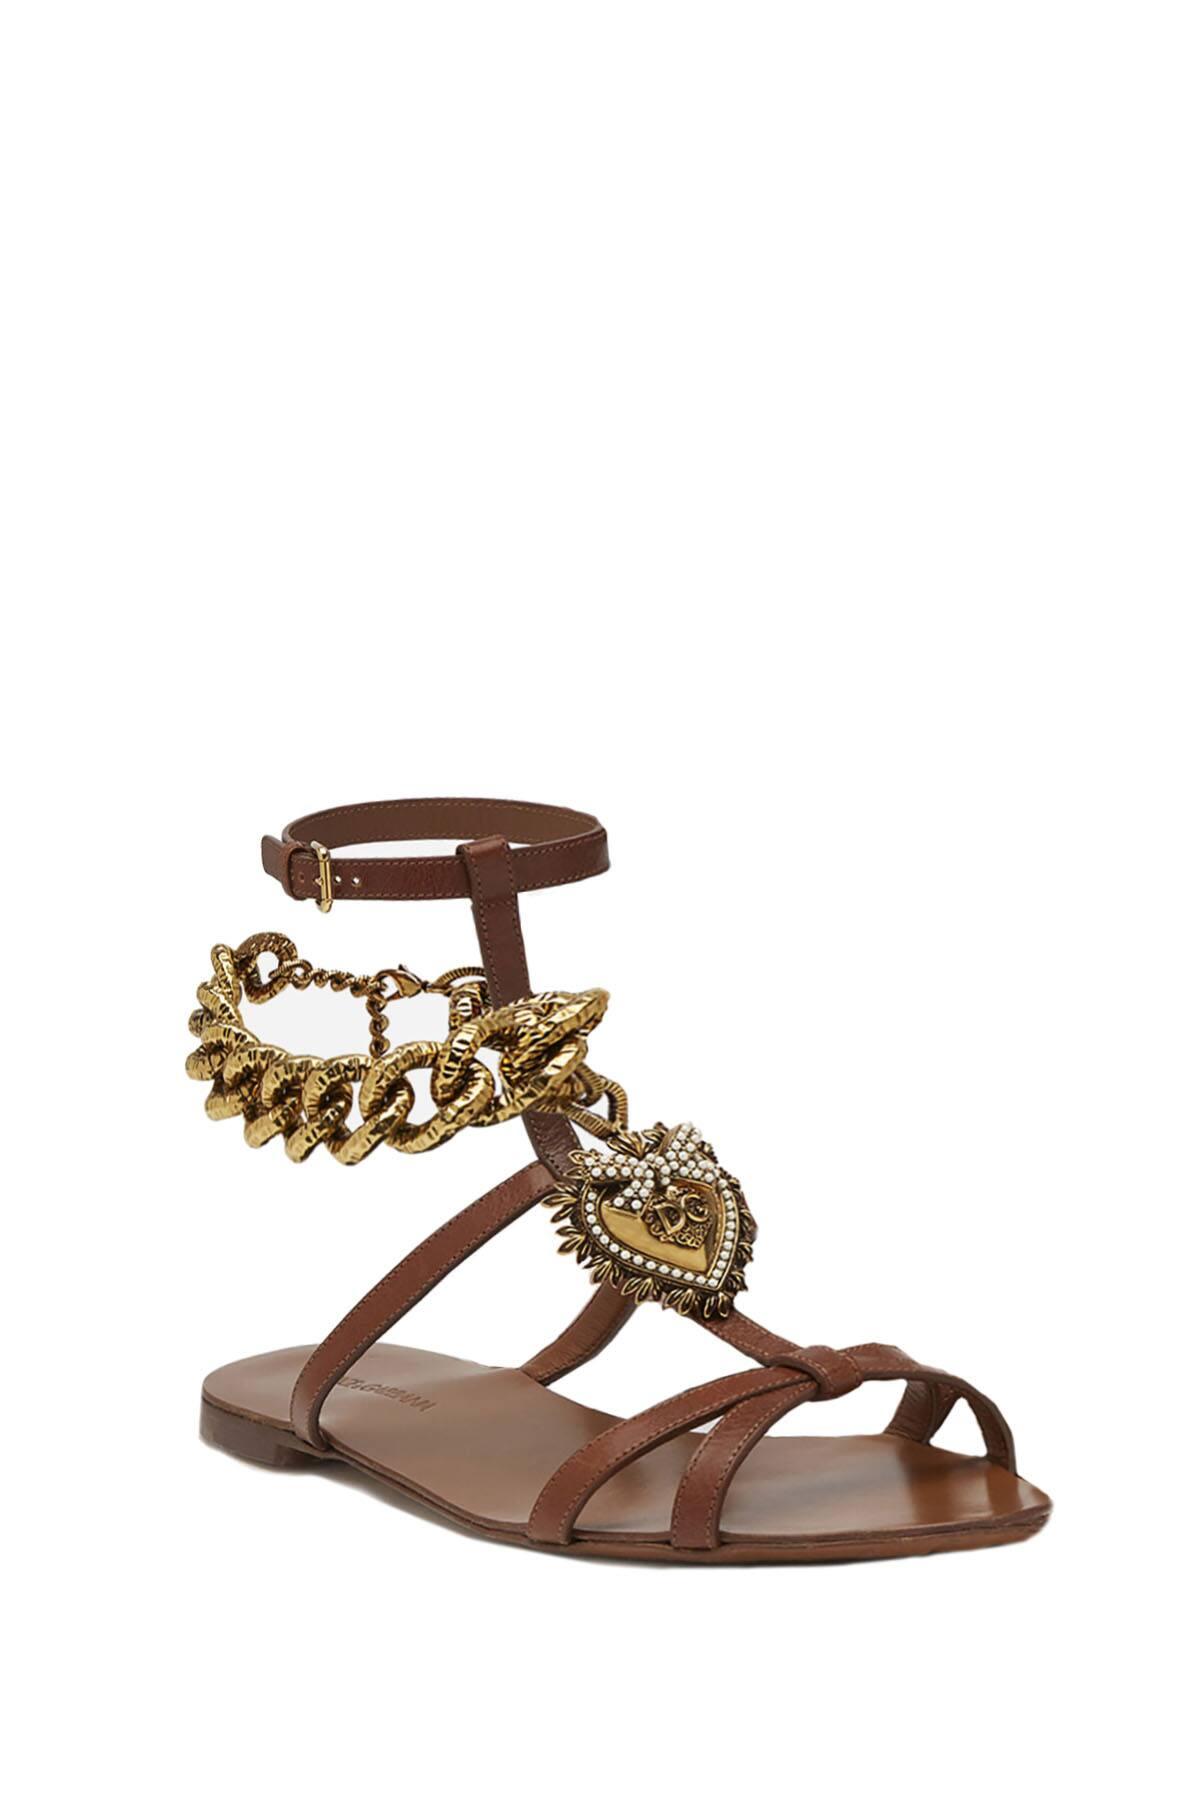 Dolce & Gabbana Devotion Heart And Chain Leather Sandals in Tan (Brown ...